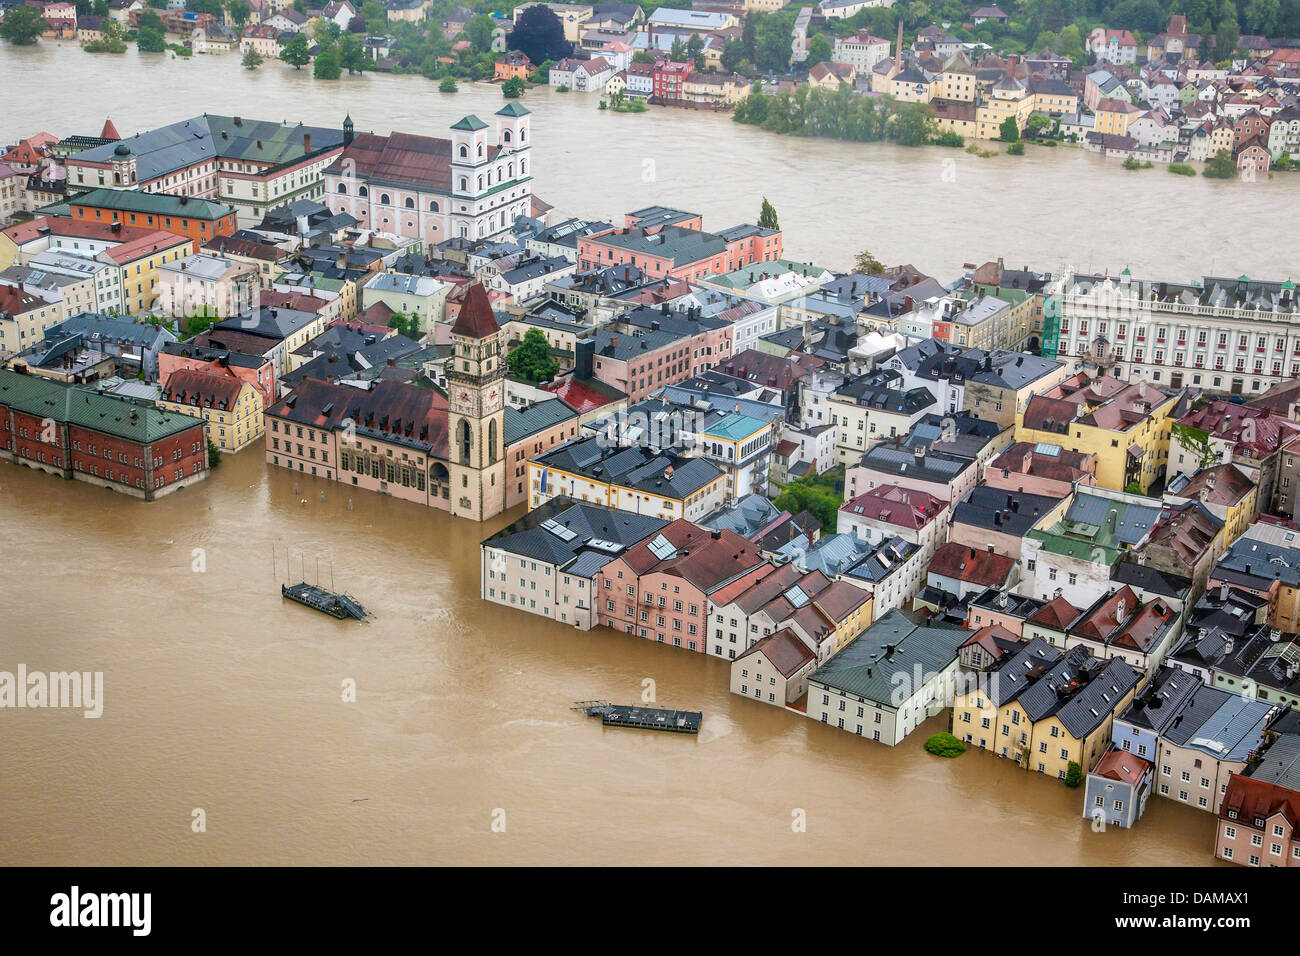 old city with townhall flooded in June 2013, Germany, Bavaria, Passau Stock Photo